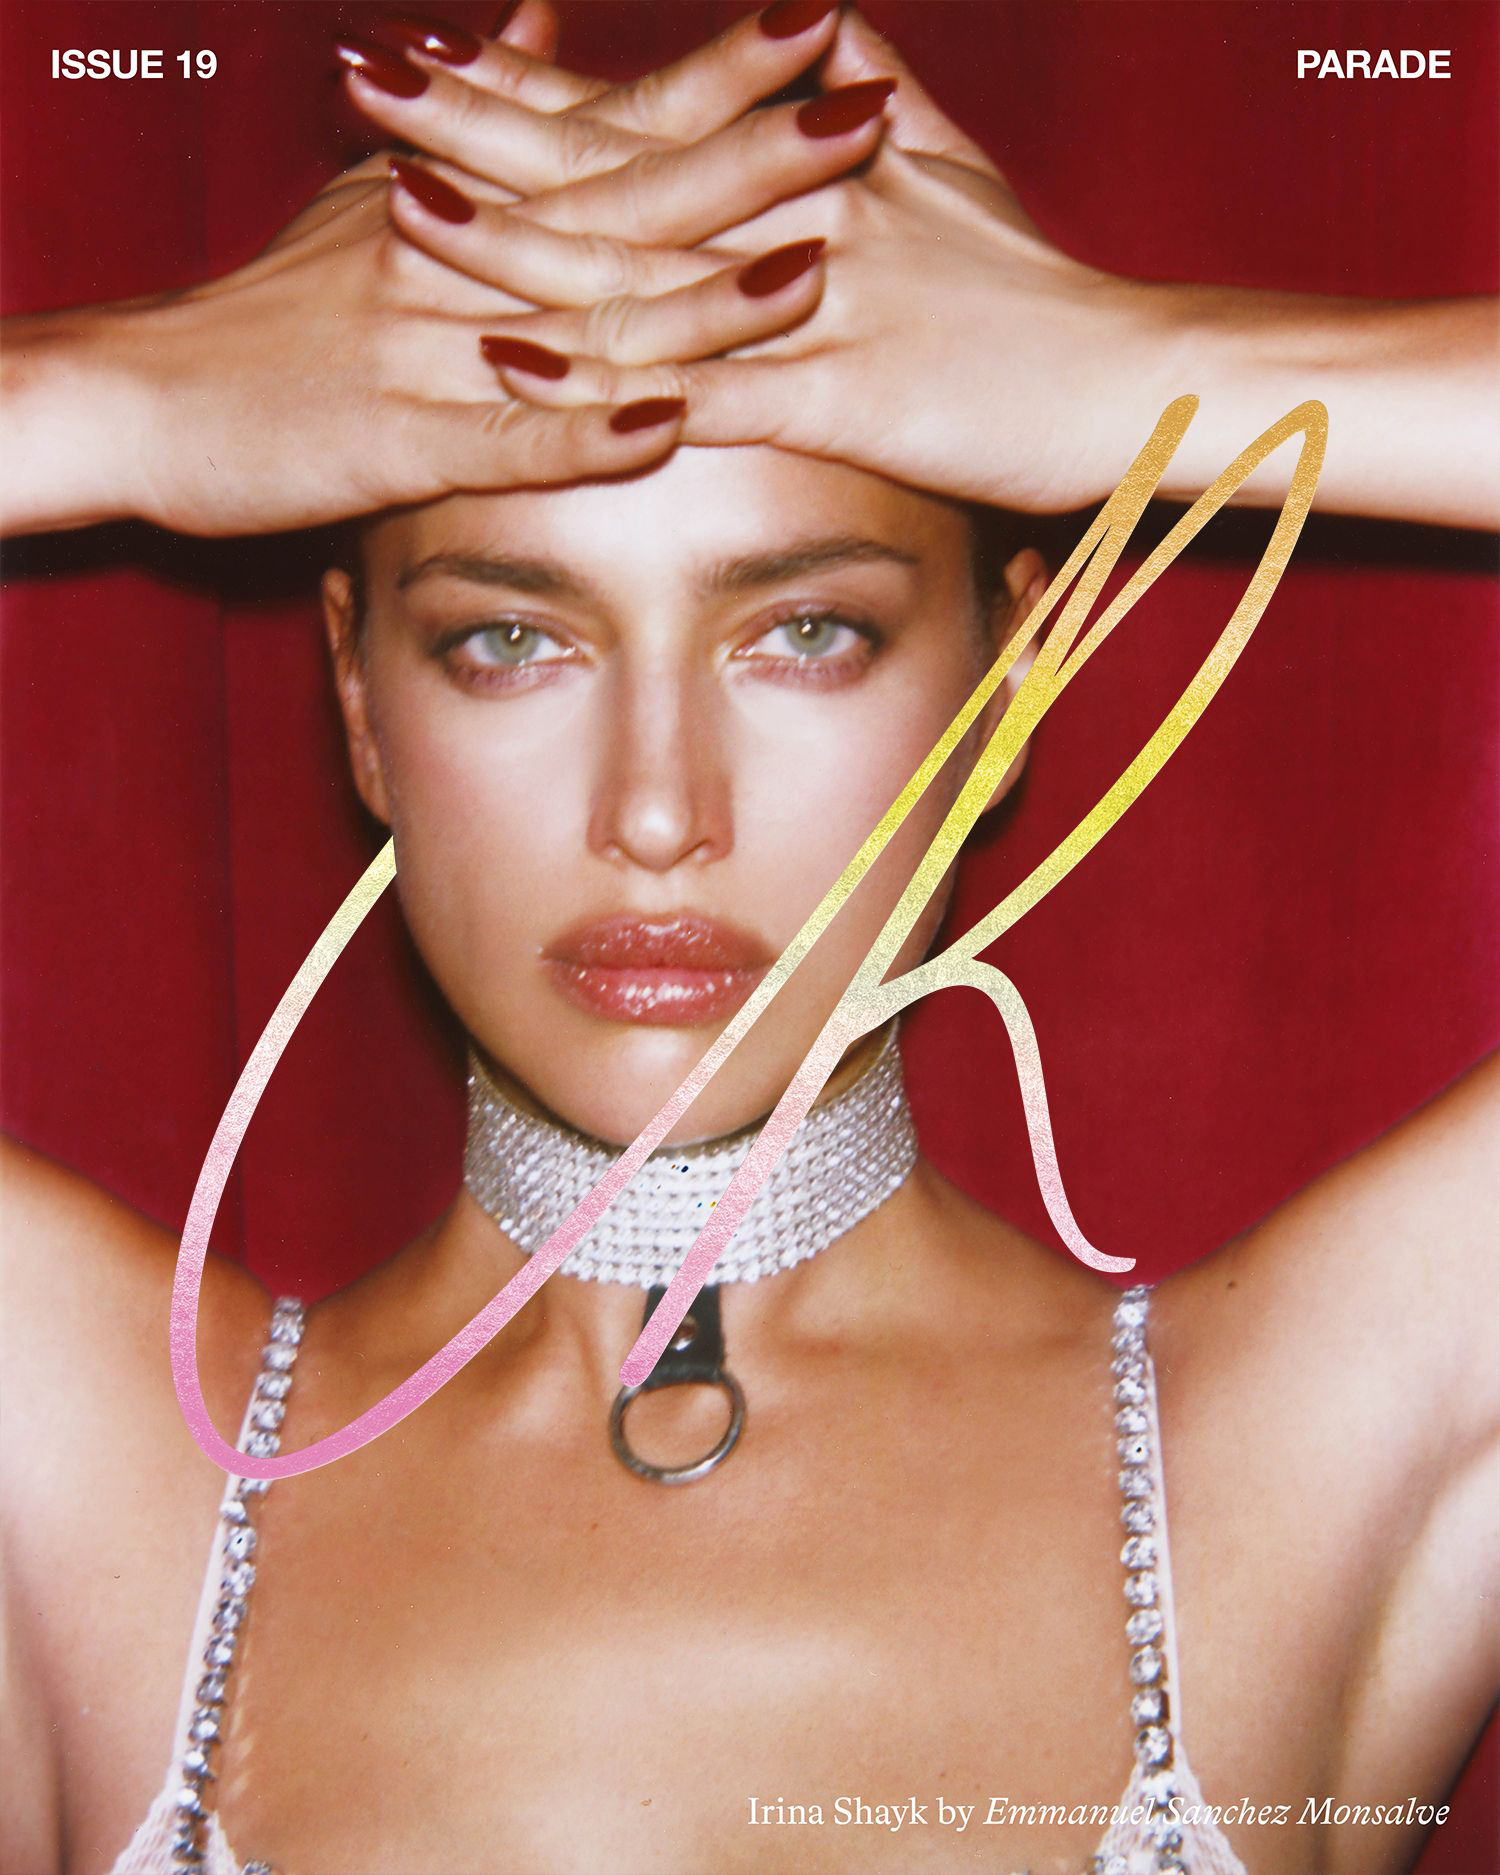 Irina Shayk and Candice Swanepoel cover CR Fashion Book Issue 19 by Emmanuel Sanchez Monsalve